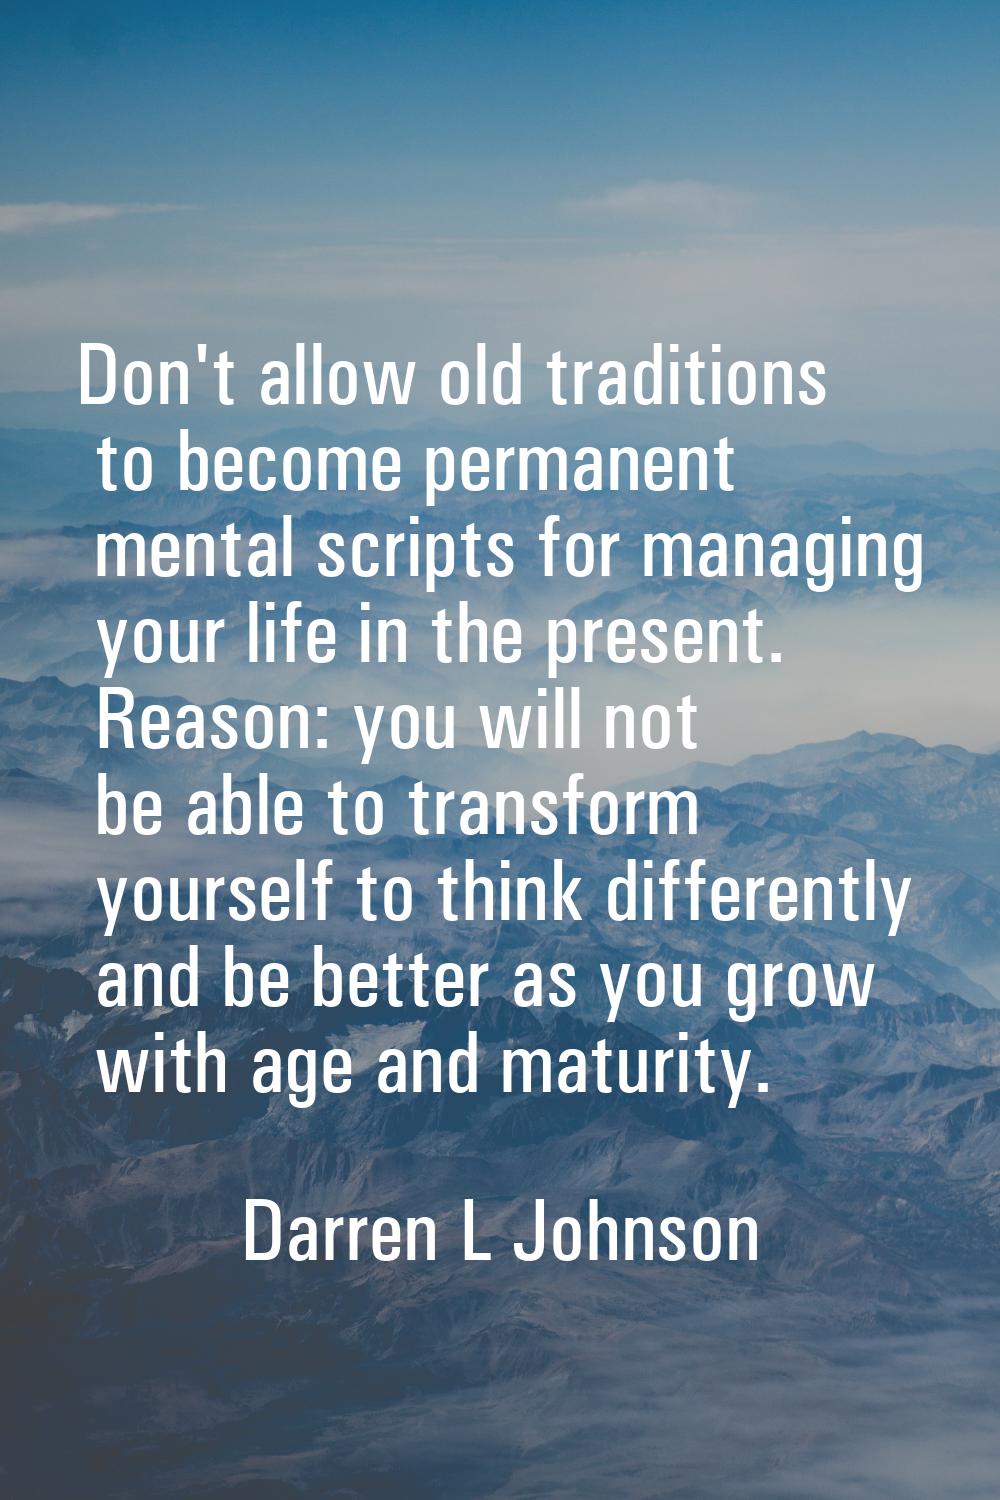 Don't allow old traditions to become permanent mental scripts for managing your life in the present